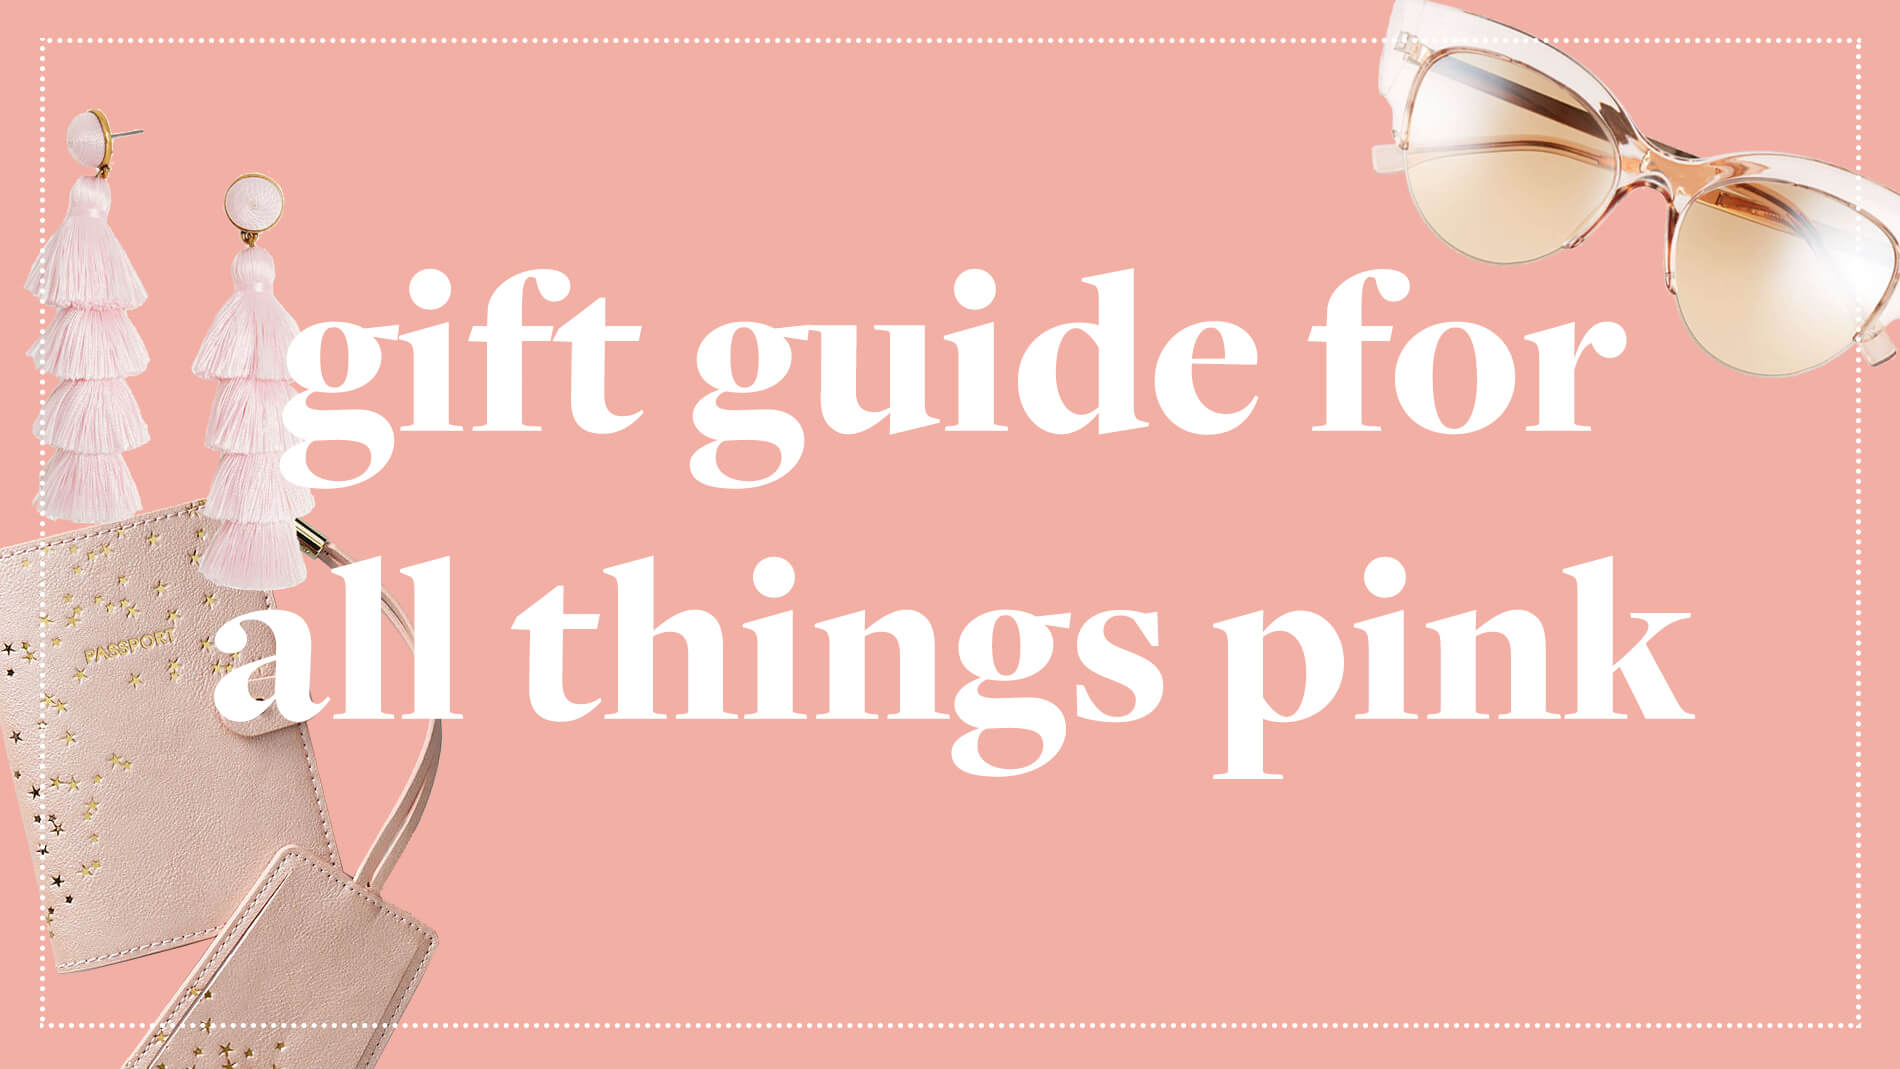 Gift Guide For All Things Pink - Millennial Pink Gift Ideas - Keiko Lynn